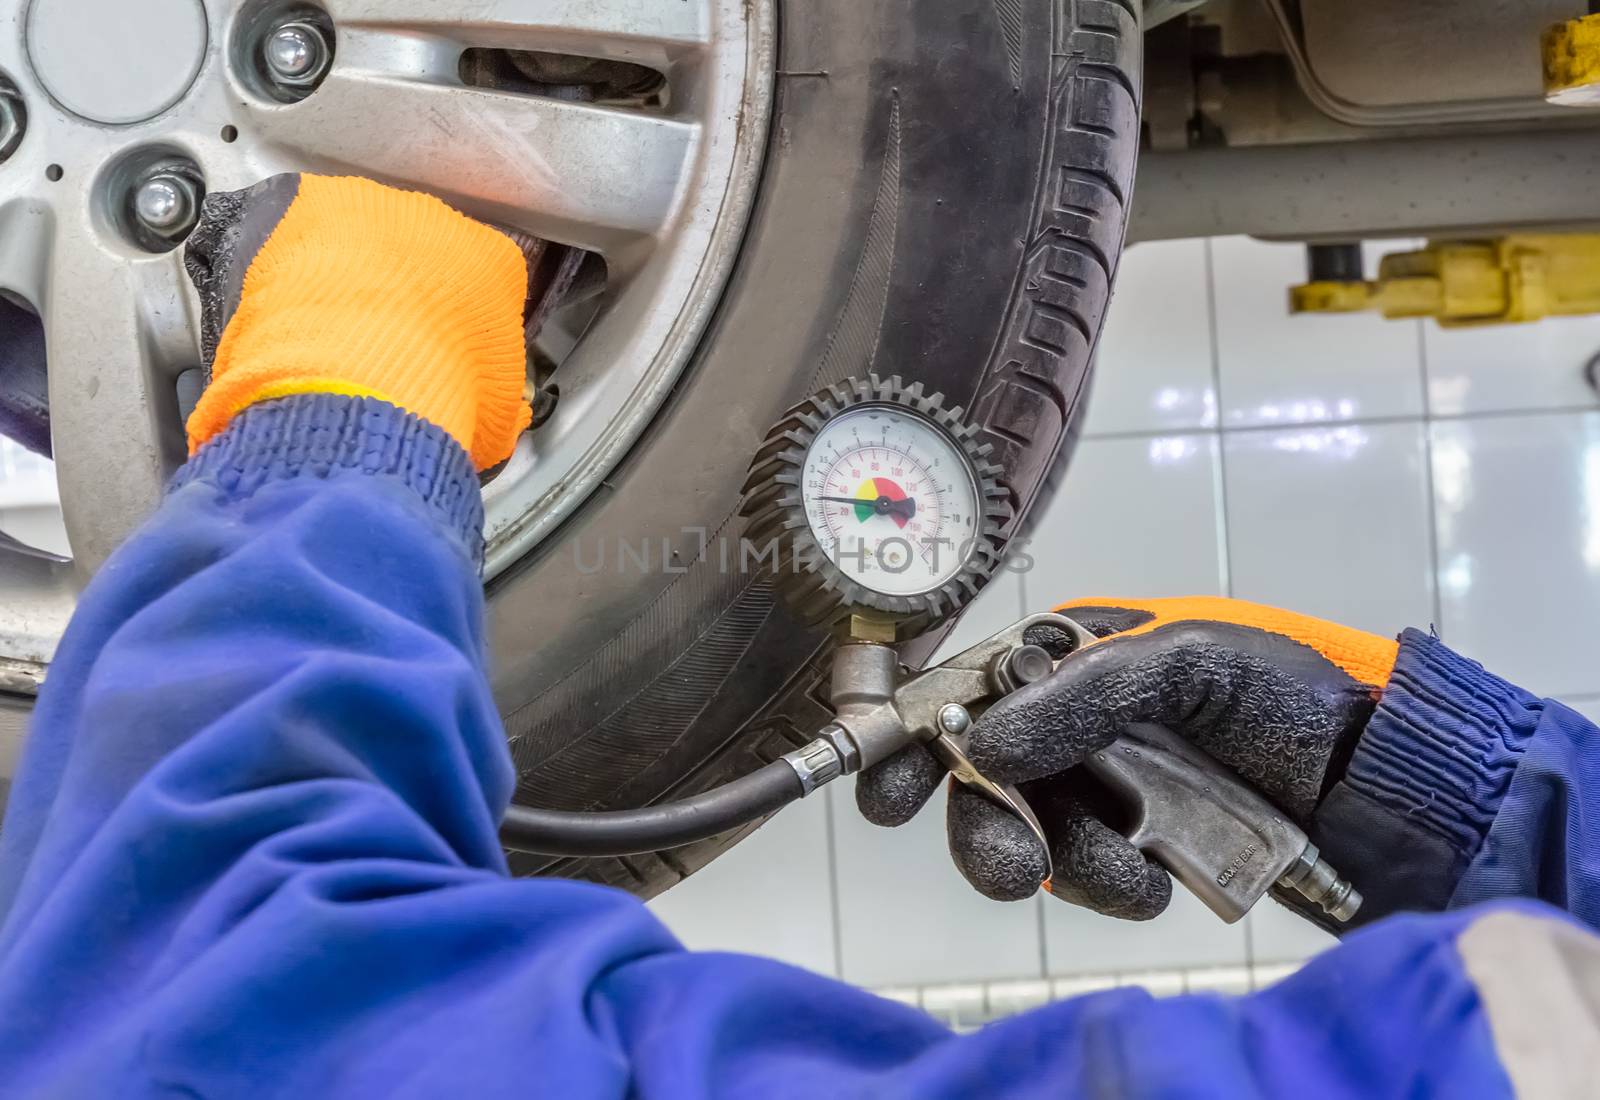 Closeup of mechanic wearing orange gloves and blue outfit at repair service station checking tyre pressure with gauge.